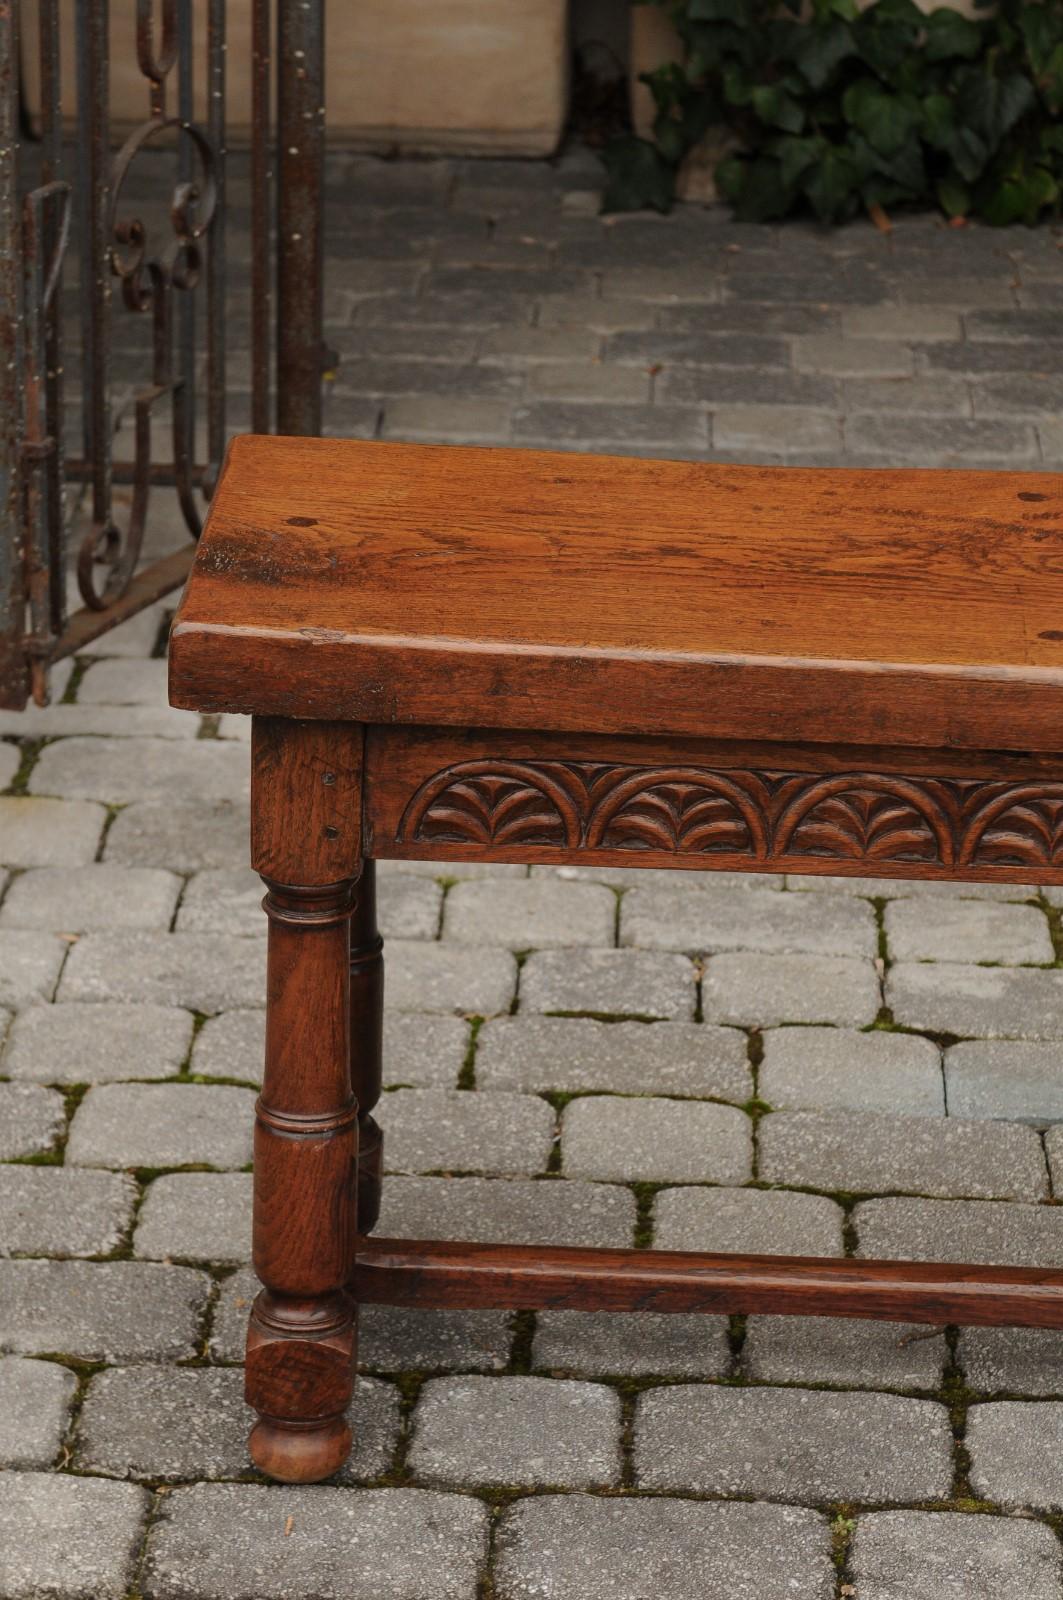 English Oak 1880s Bench with Low-Relief Carved Decor and Column-Shaped Legs In Good Condition For Sale In Atlanta, GA